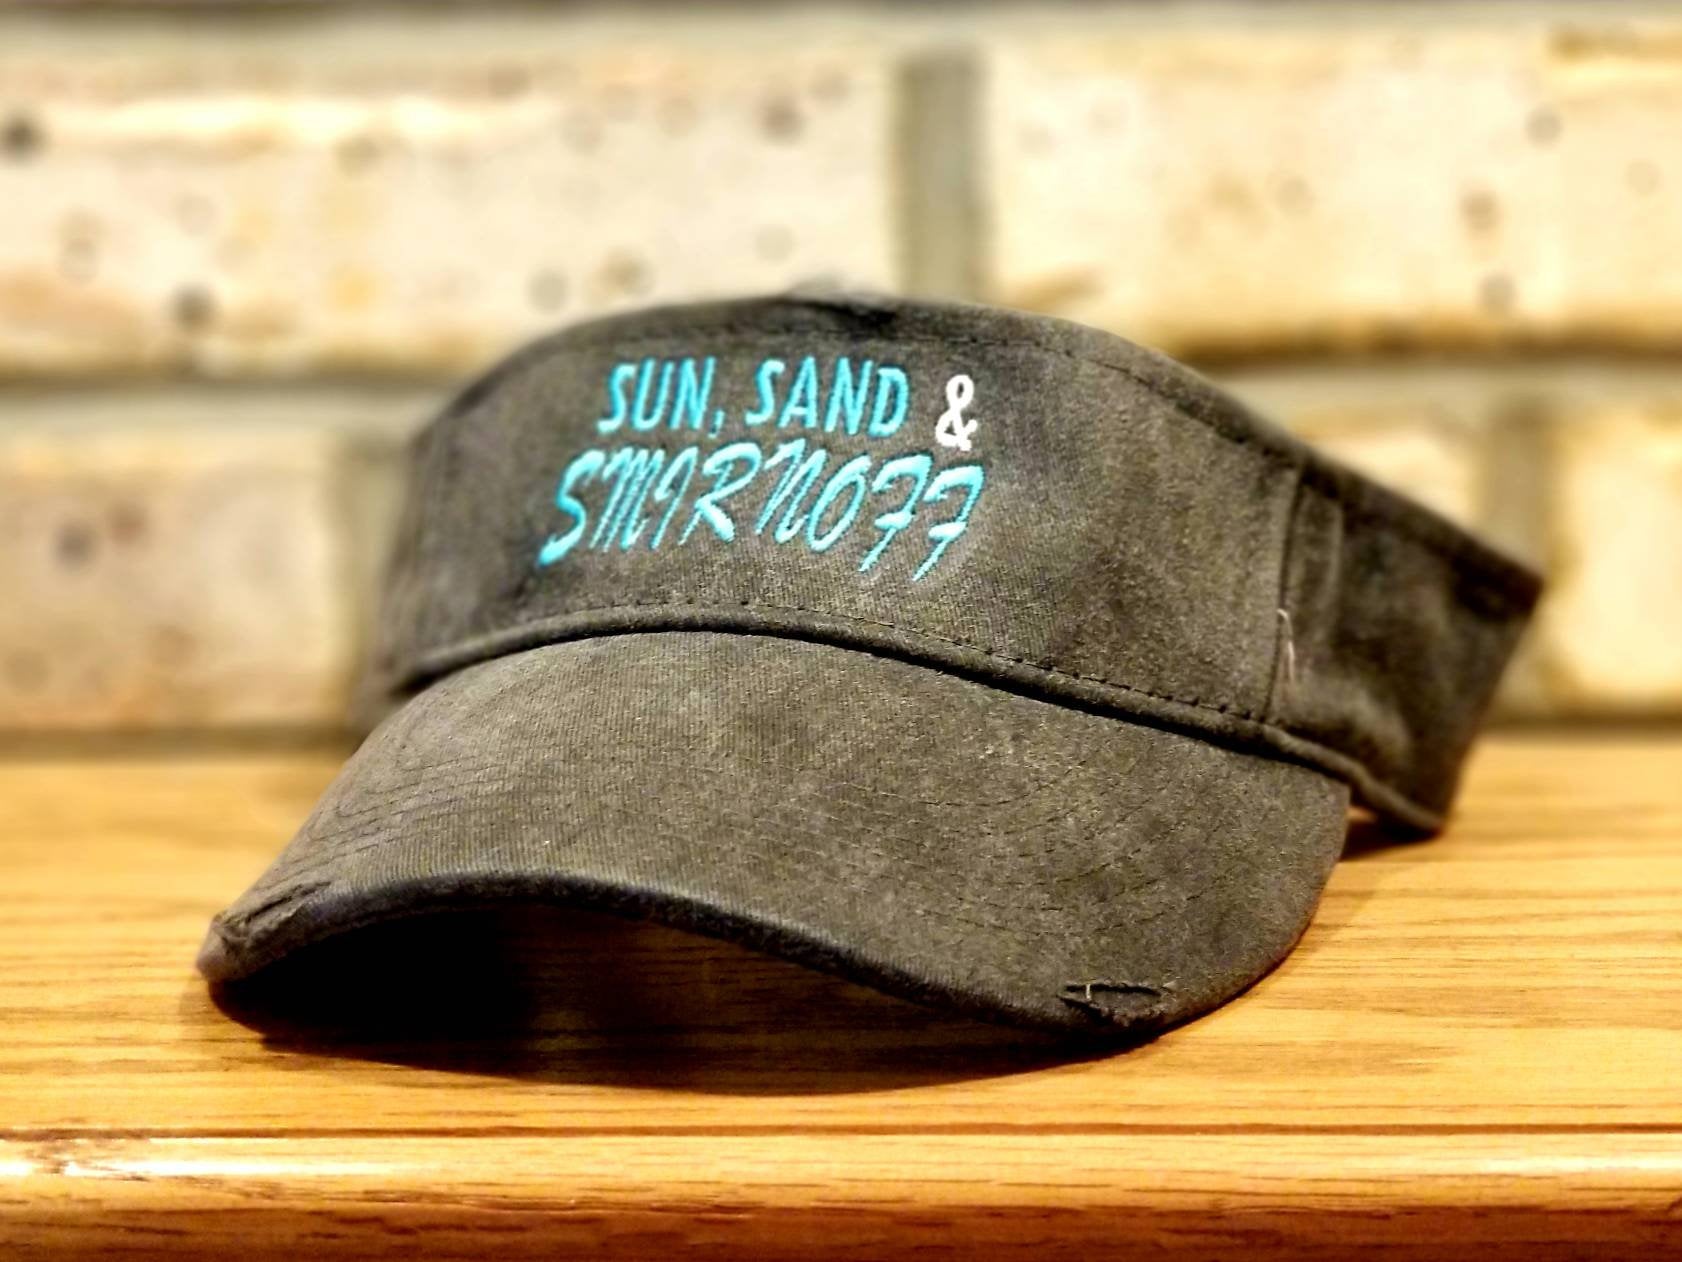 Sun, Sand, and Smirnoff Visor - I'll Bring The Alcohol and Bad Decisions, Girls Trip, Summer Vacation, Custom Party, Drinking, Beach Hat